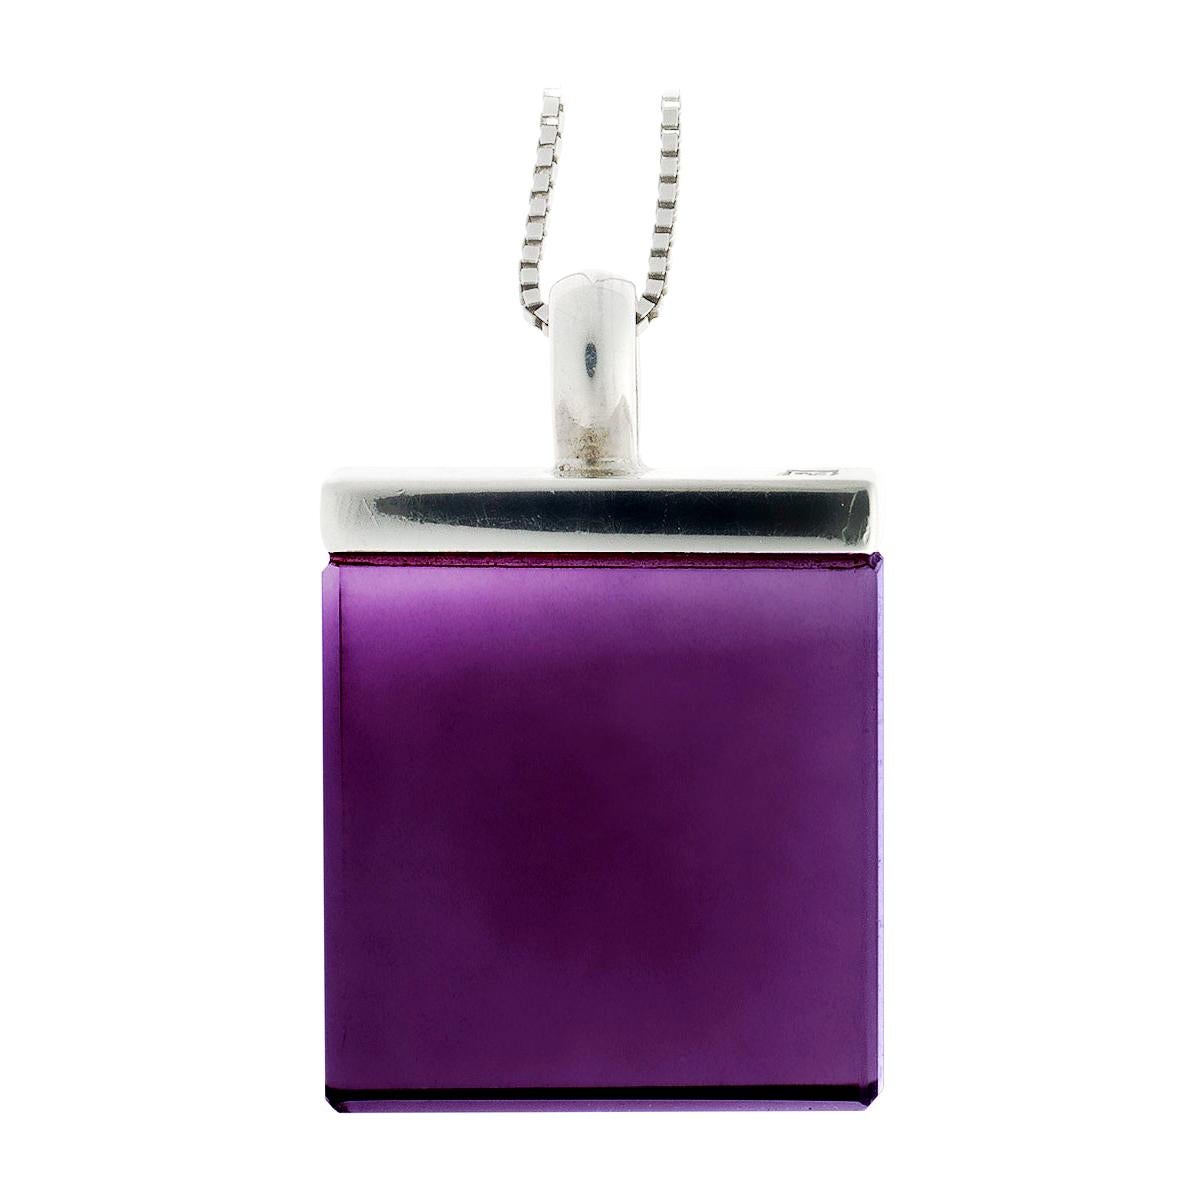 Featured in Vogue Designer Sterling Silver Pendant Necklace with Vivid Amethyst